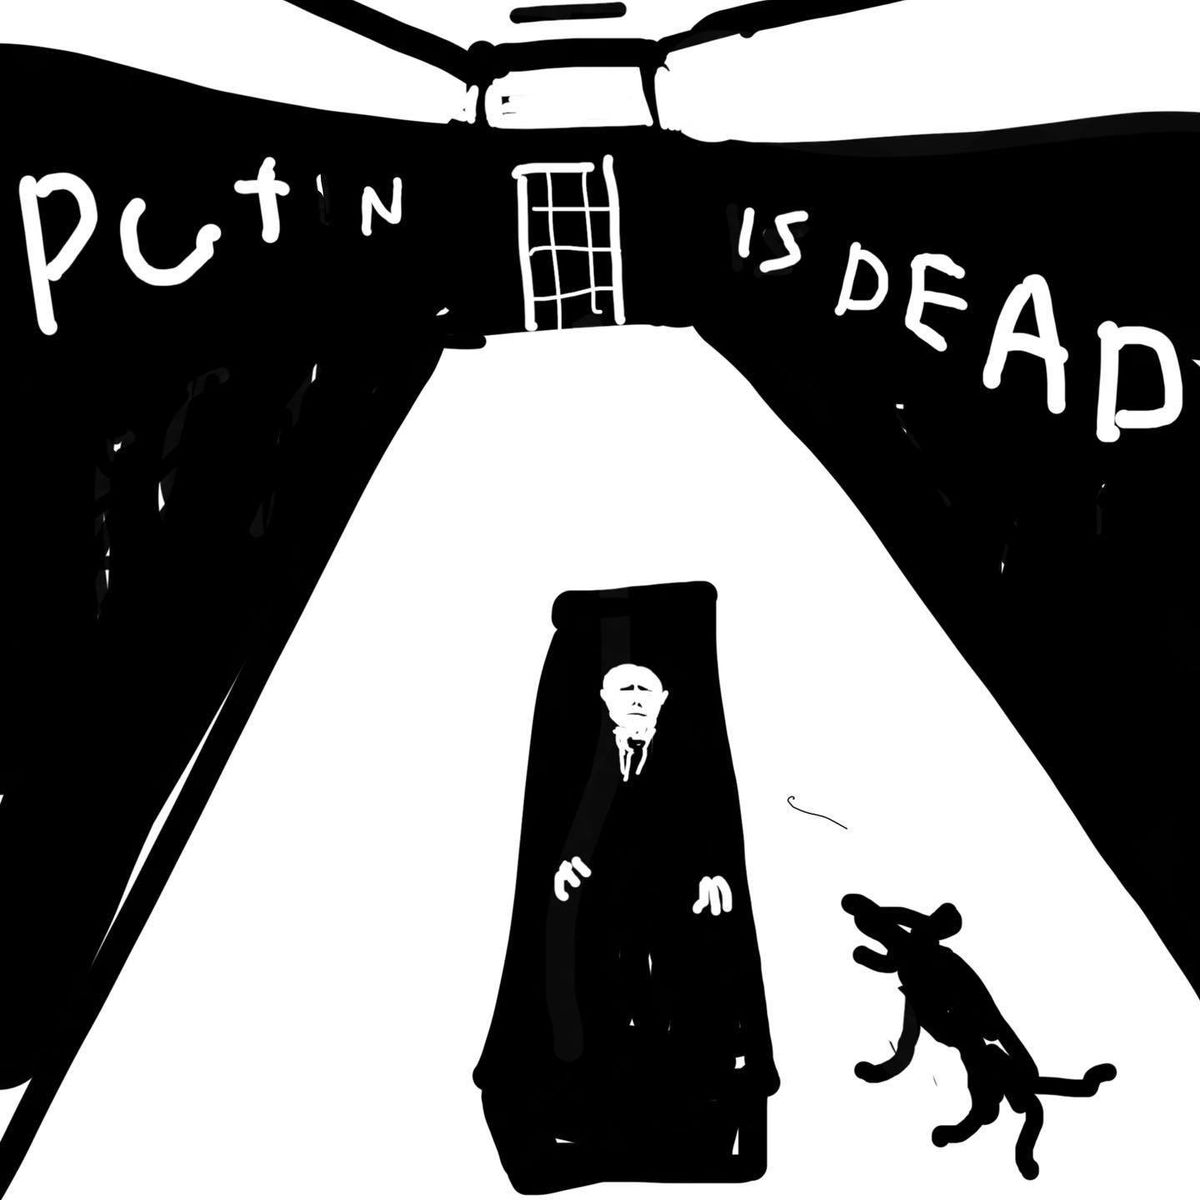 Alisa Yoffe's Putin is Dead, made for the cover of Xanax Tbilisi's song of the same name Courtesy of the artists